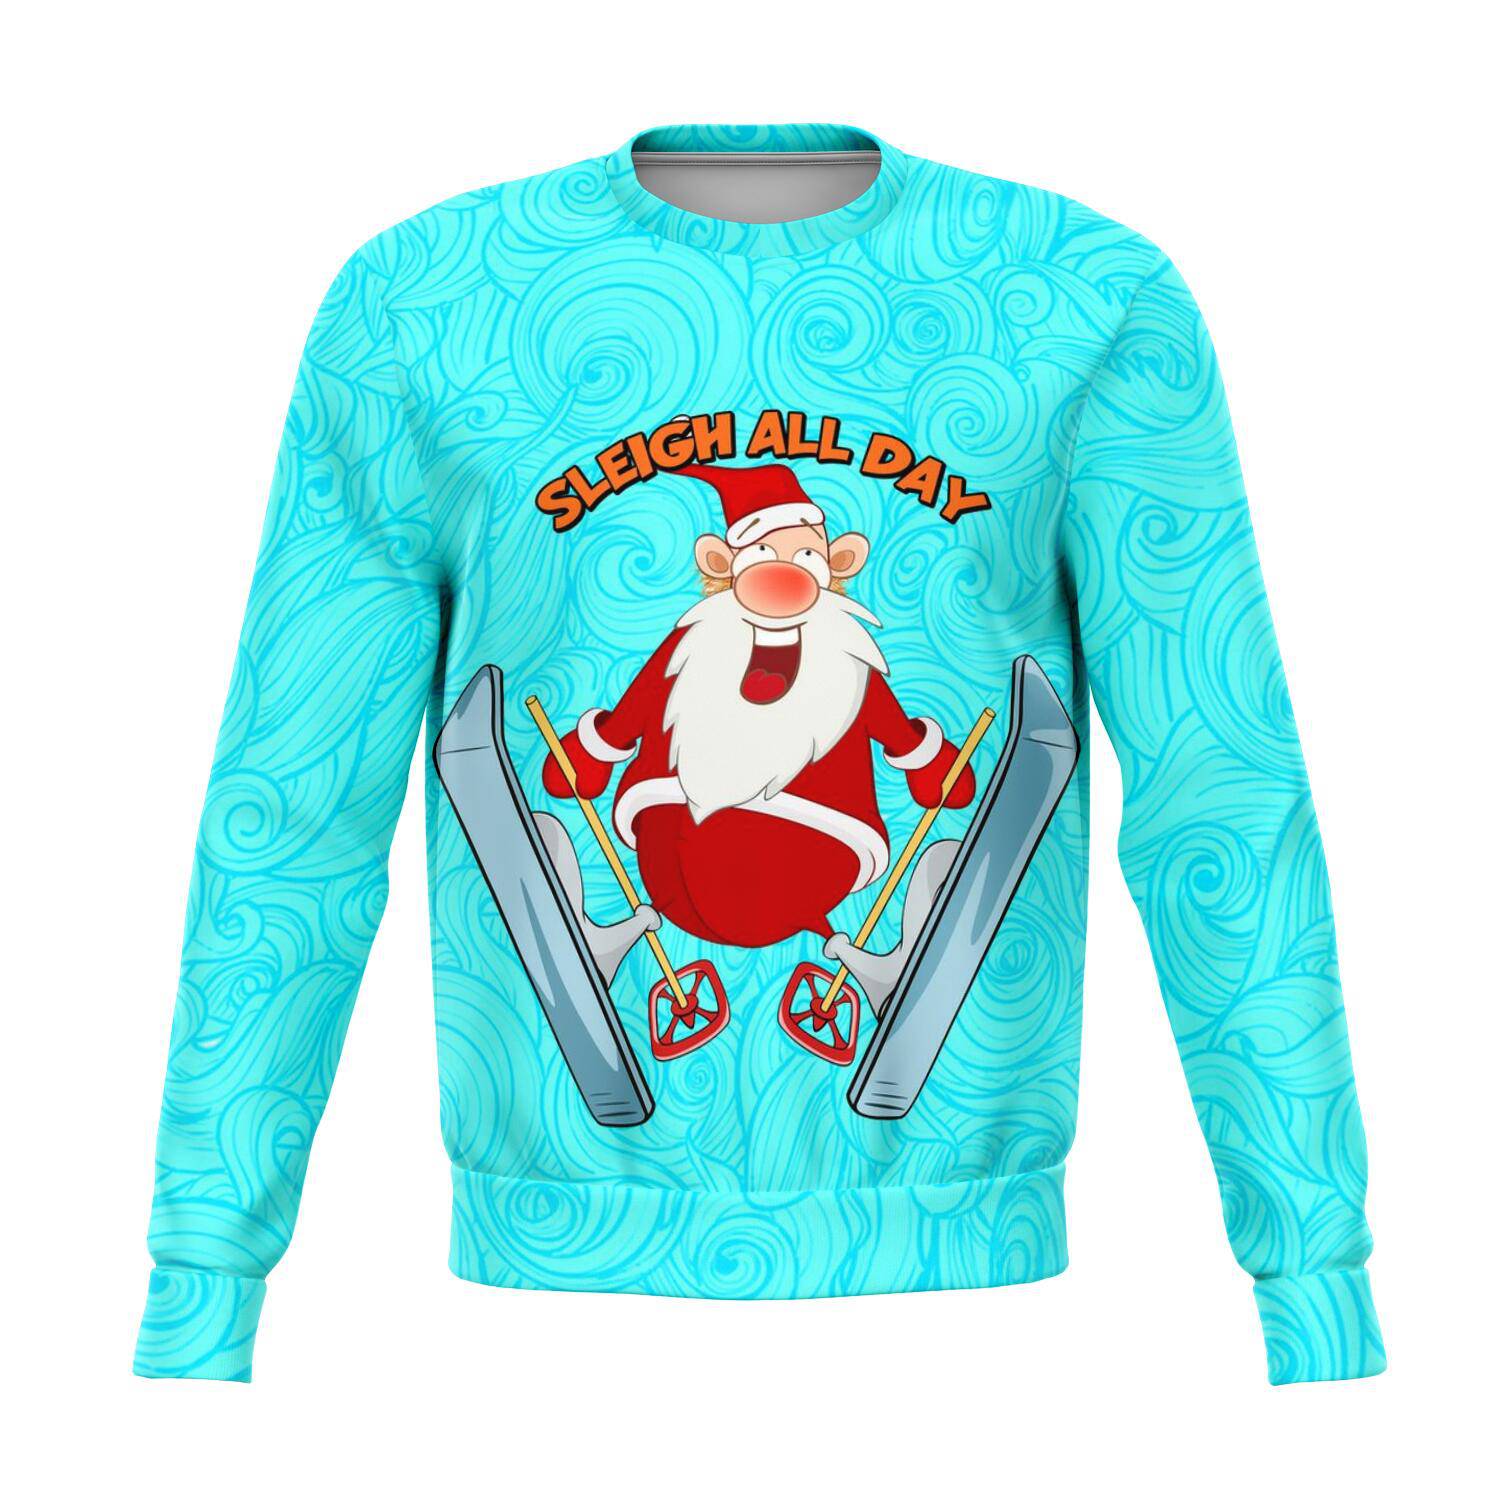 Sleigh All Day Skiing Ugly Christmas Sweater Order By December - Powderaddicts